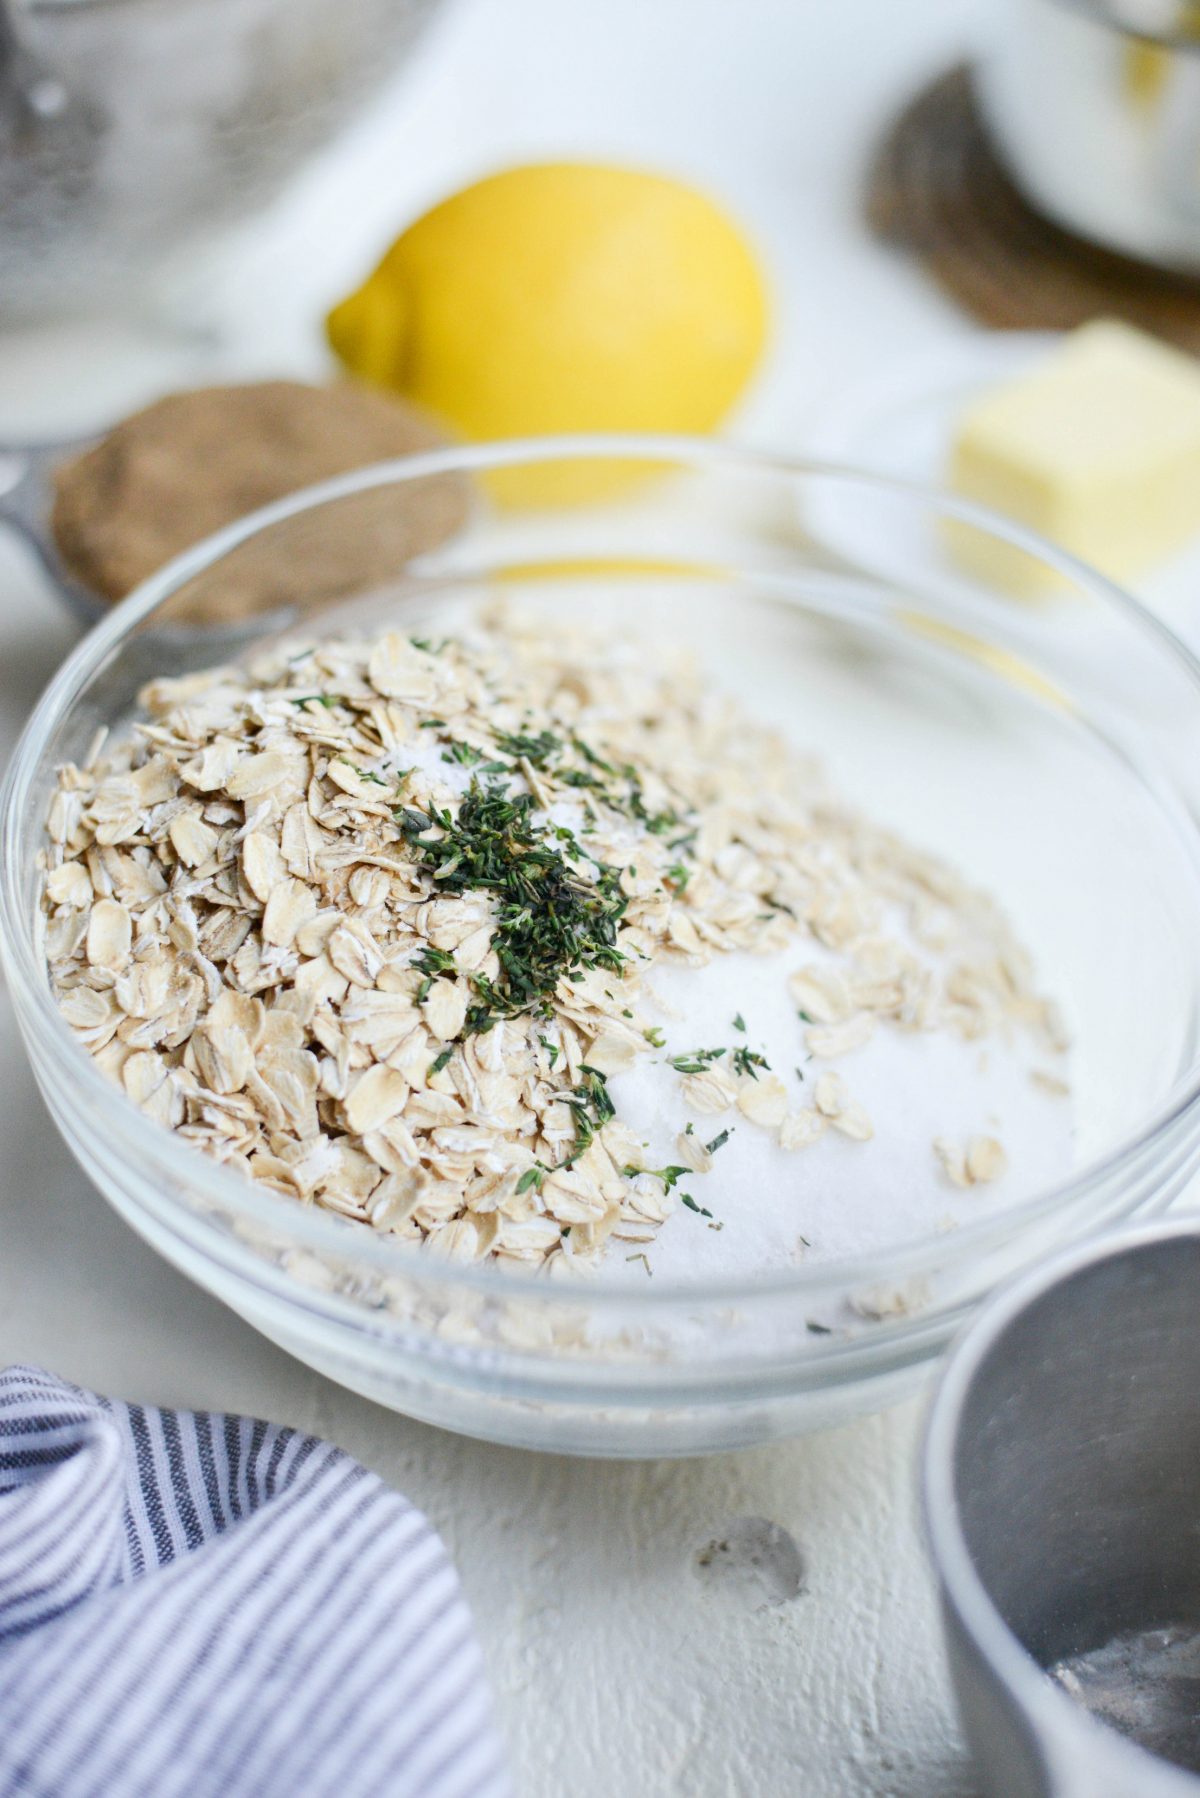 fresh thyme added to oats and sugar